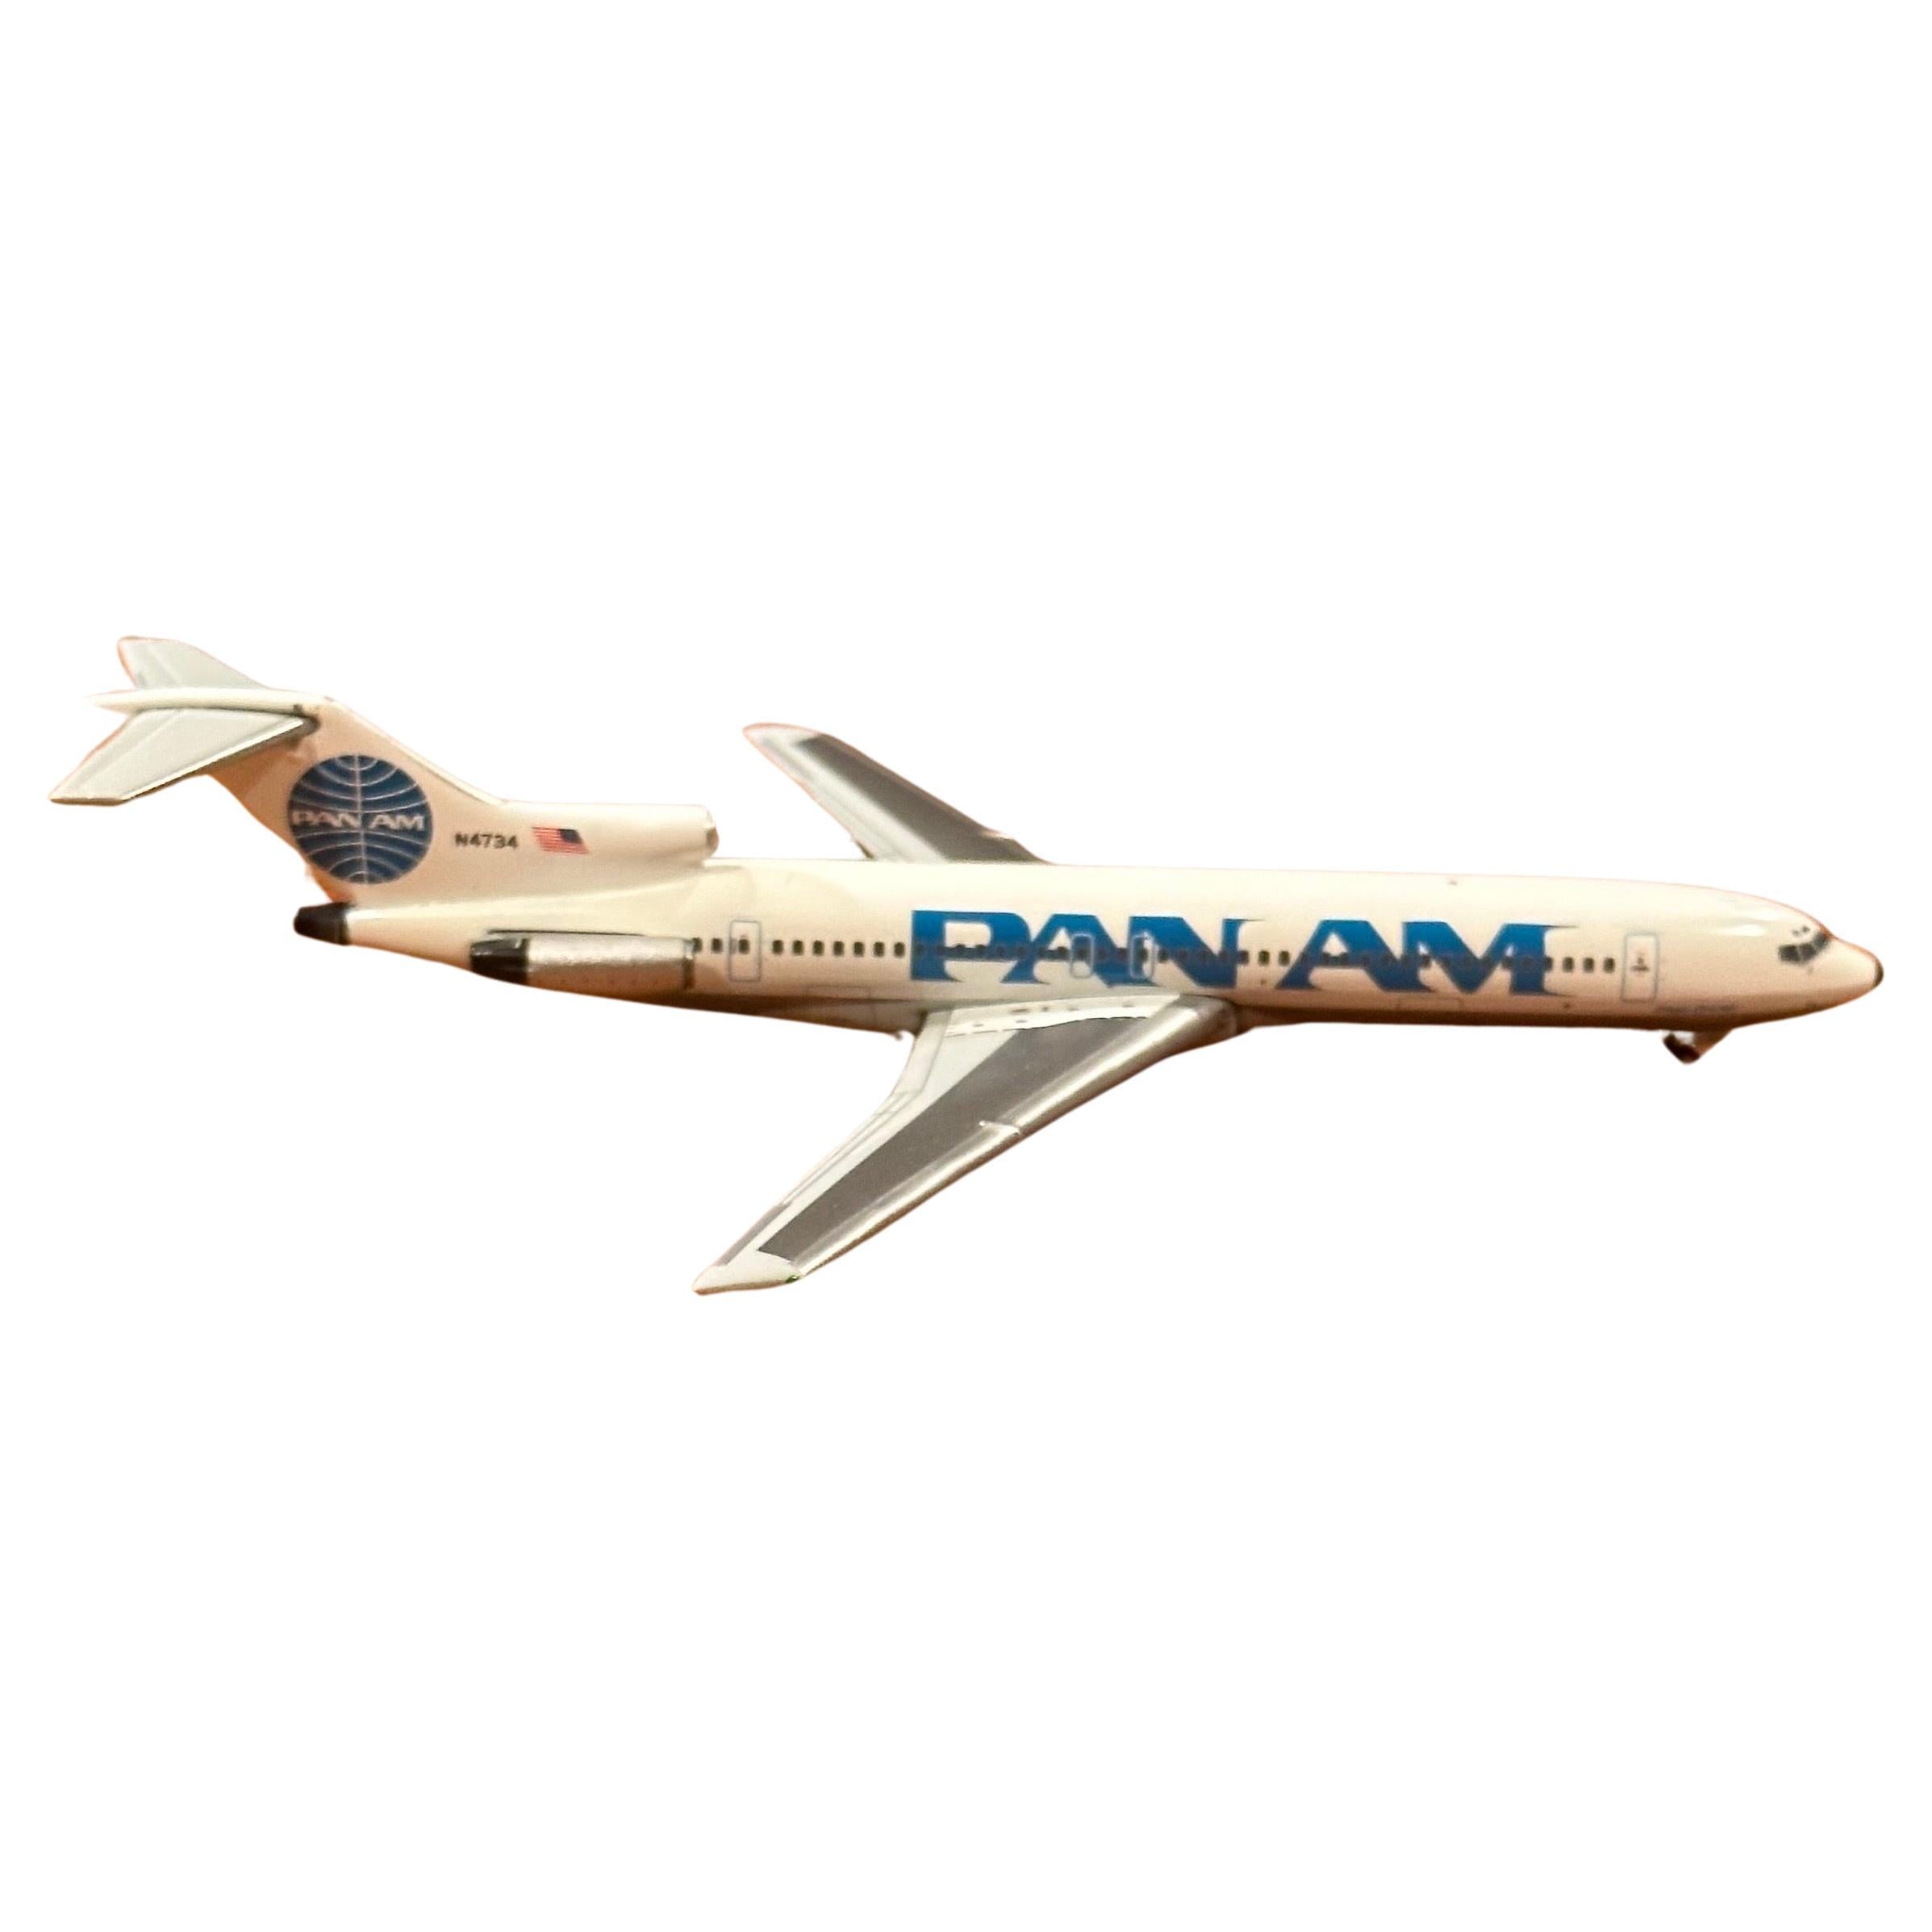 A very cool Pan American Airlines jetliner / airplane die cast paperweight / mini model, circa 1990s.  The model is in very good condition and measures 745